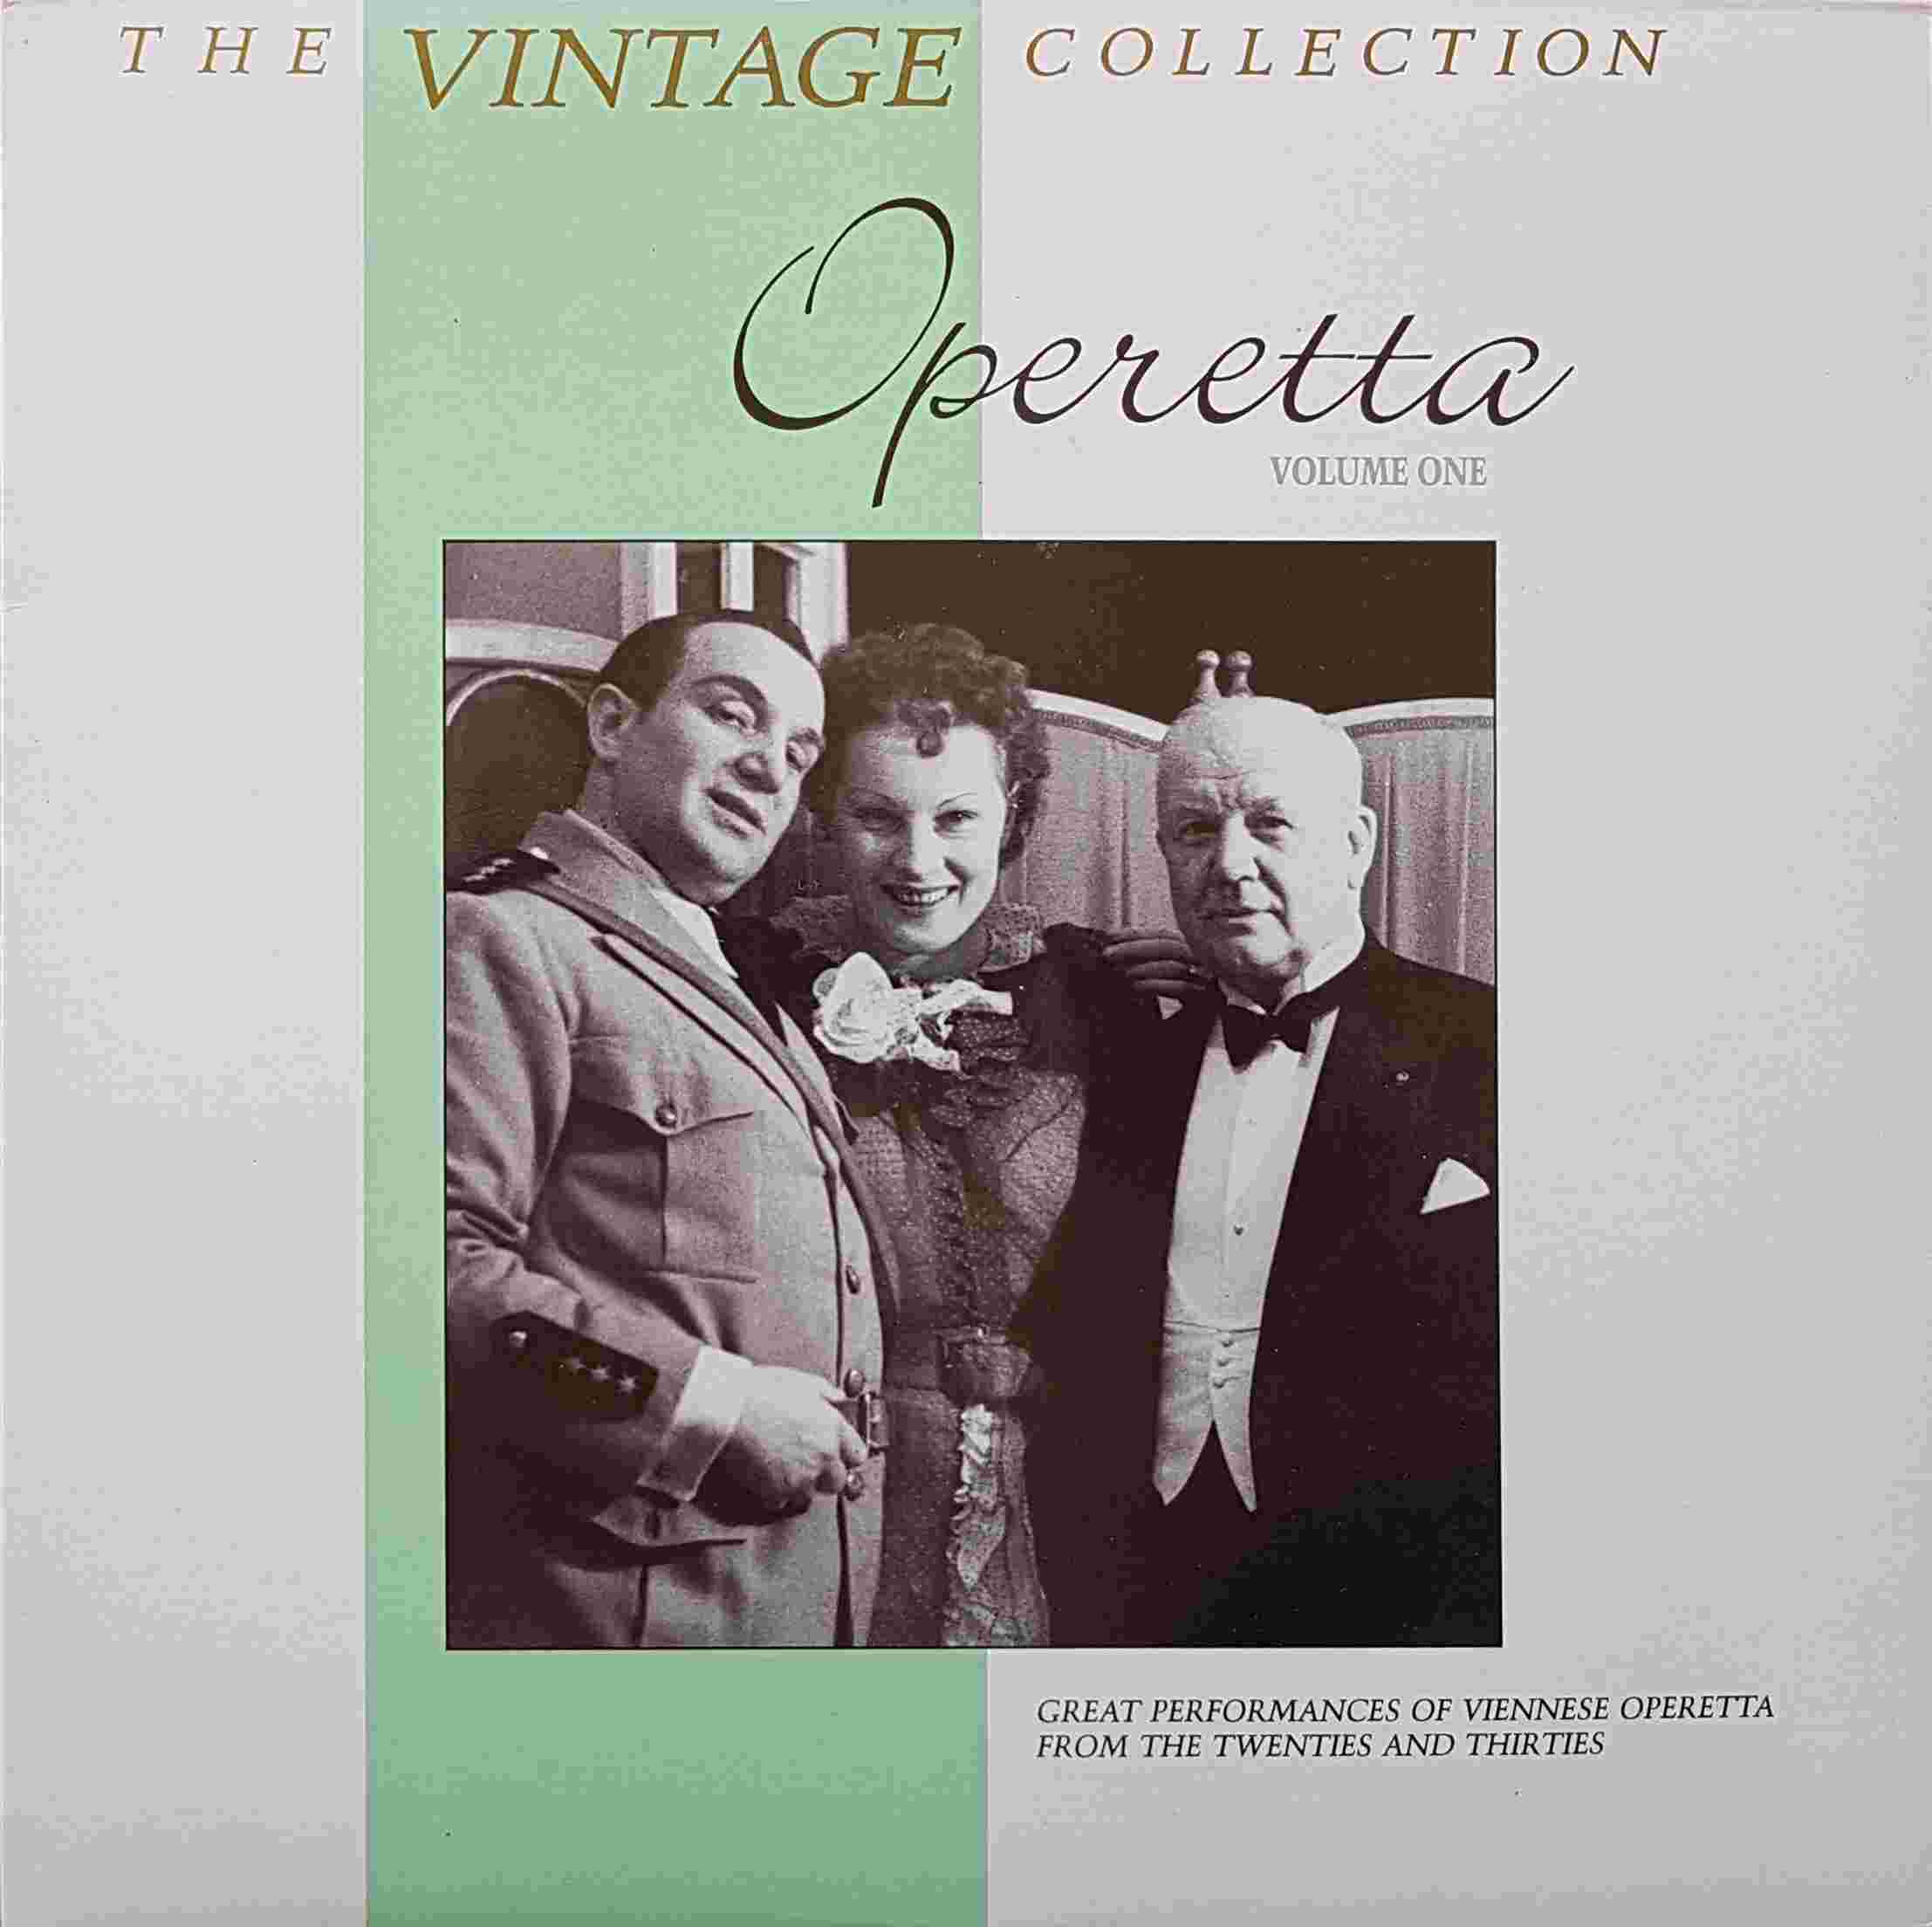 Picture of REH 716 The vintage collection - Operetta by artist Dominic Glynn from the BBC albums - Records and Tapes library